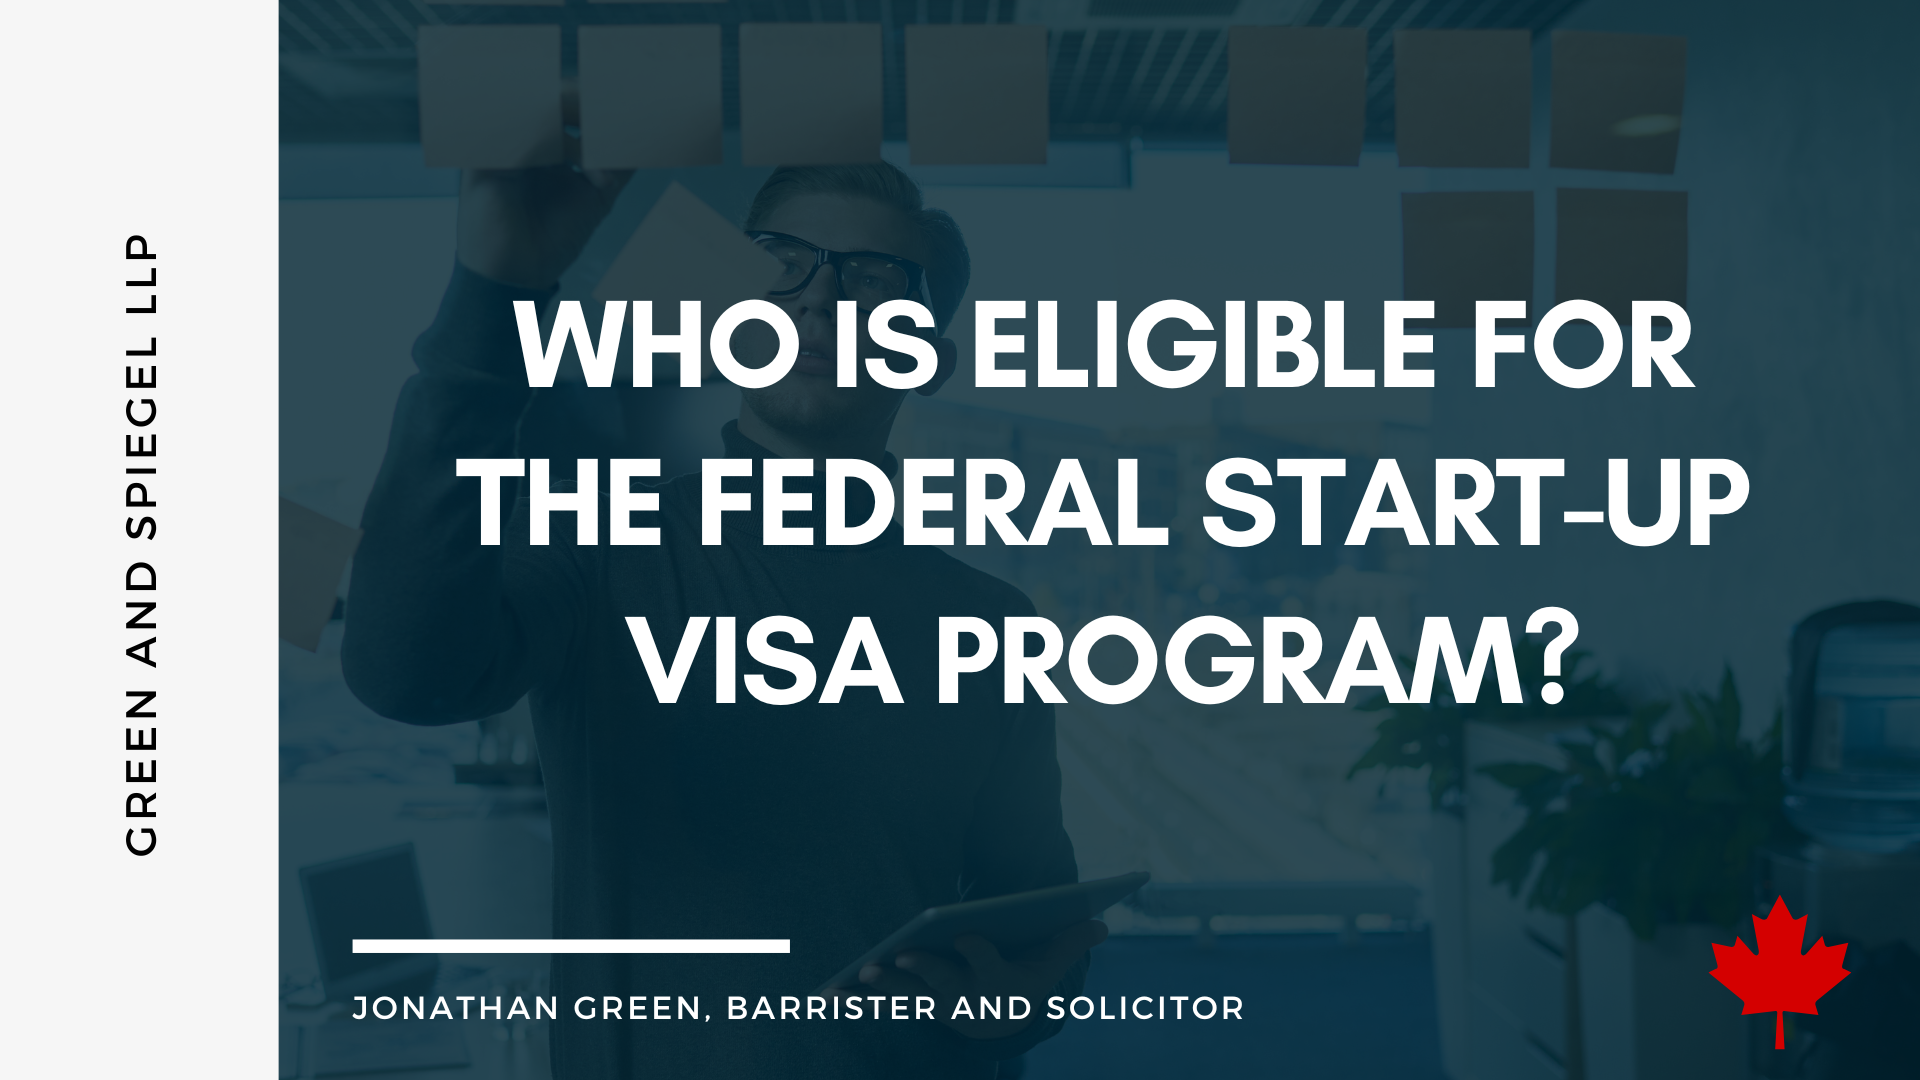 WHO IS ELIGIBLE FOR THE FEDERAL START-UP VISA PROGRAM?